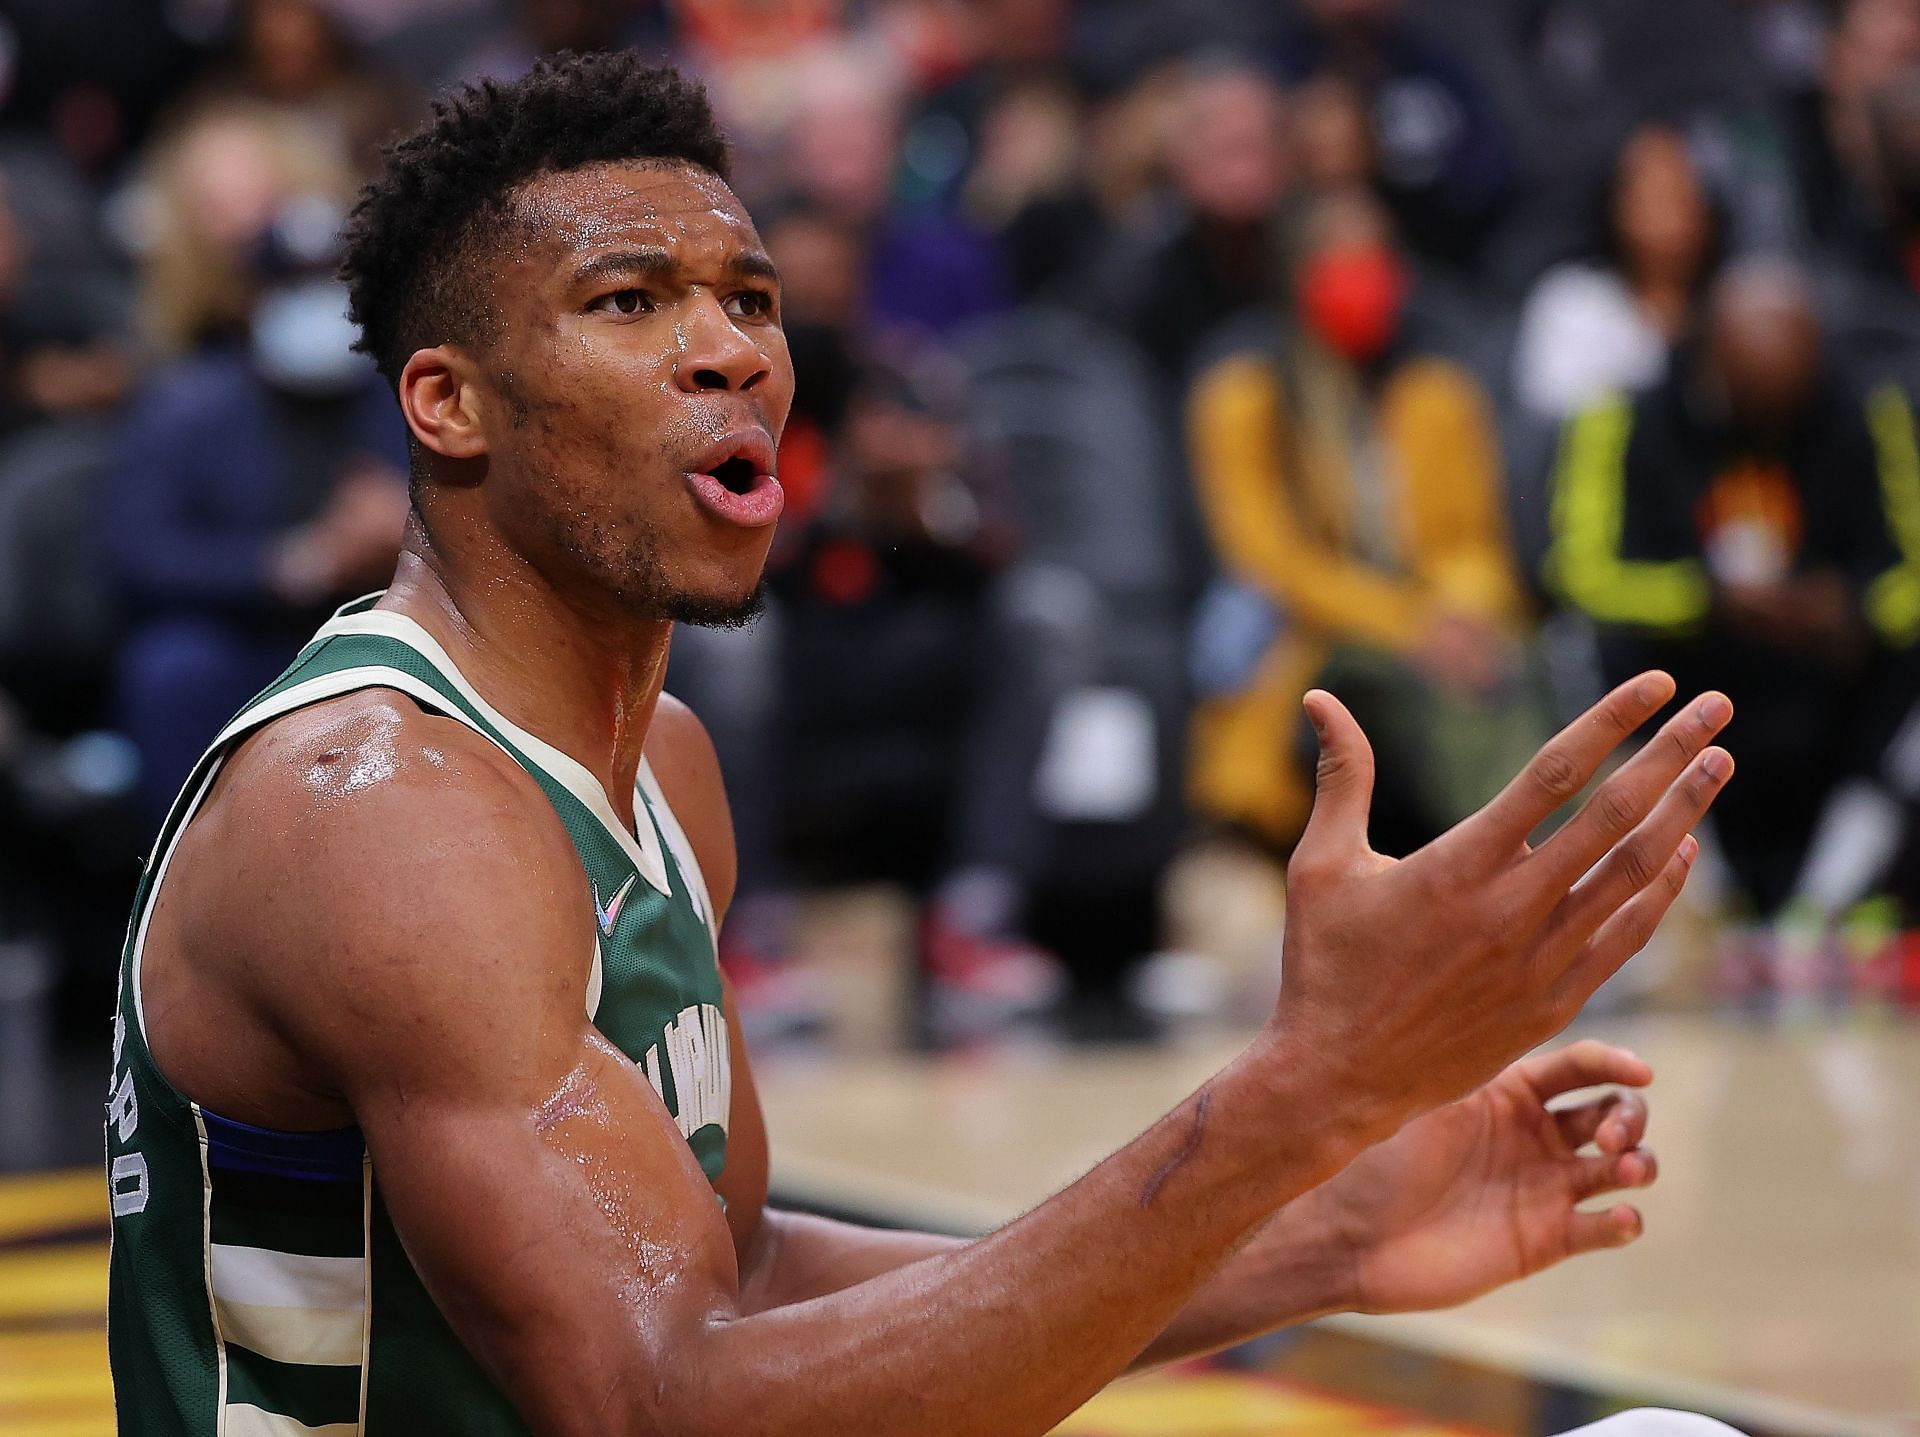 Giannis Antetokounmpo #34 of the Milwaukee Bucks reacts as he is charged with an offensive foul against the Atlanta Hawks during the second half at State Farm Arena on November 14, 2021 in Atlanta, Georgia.